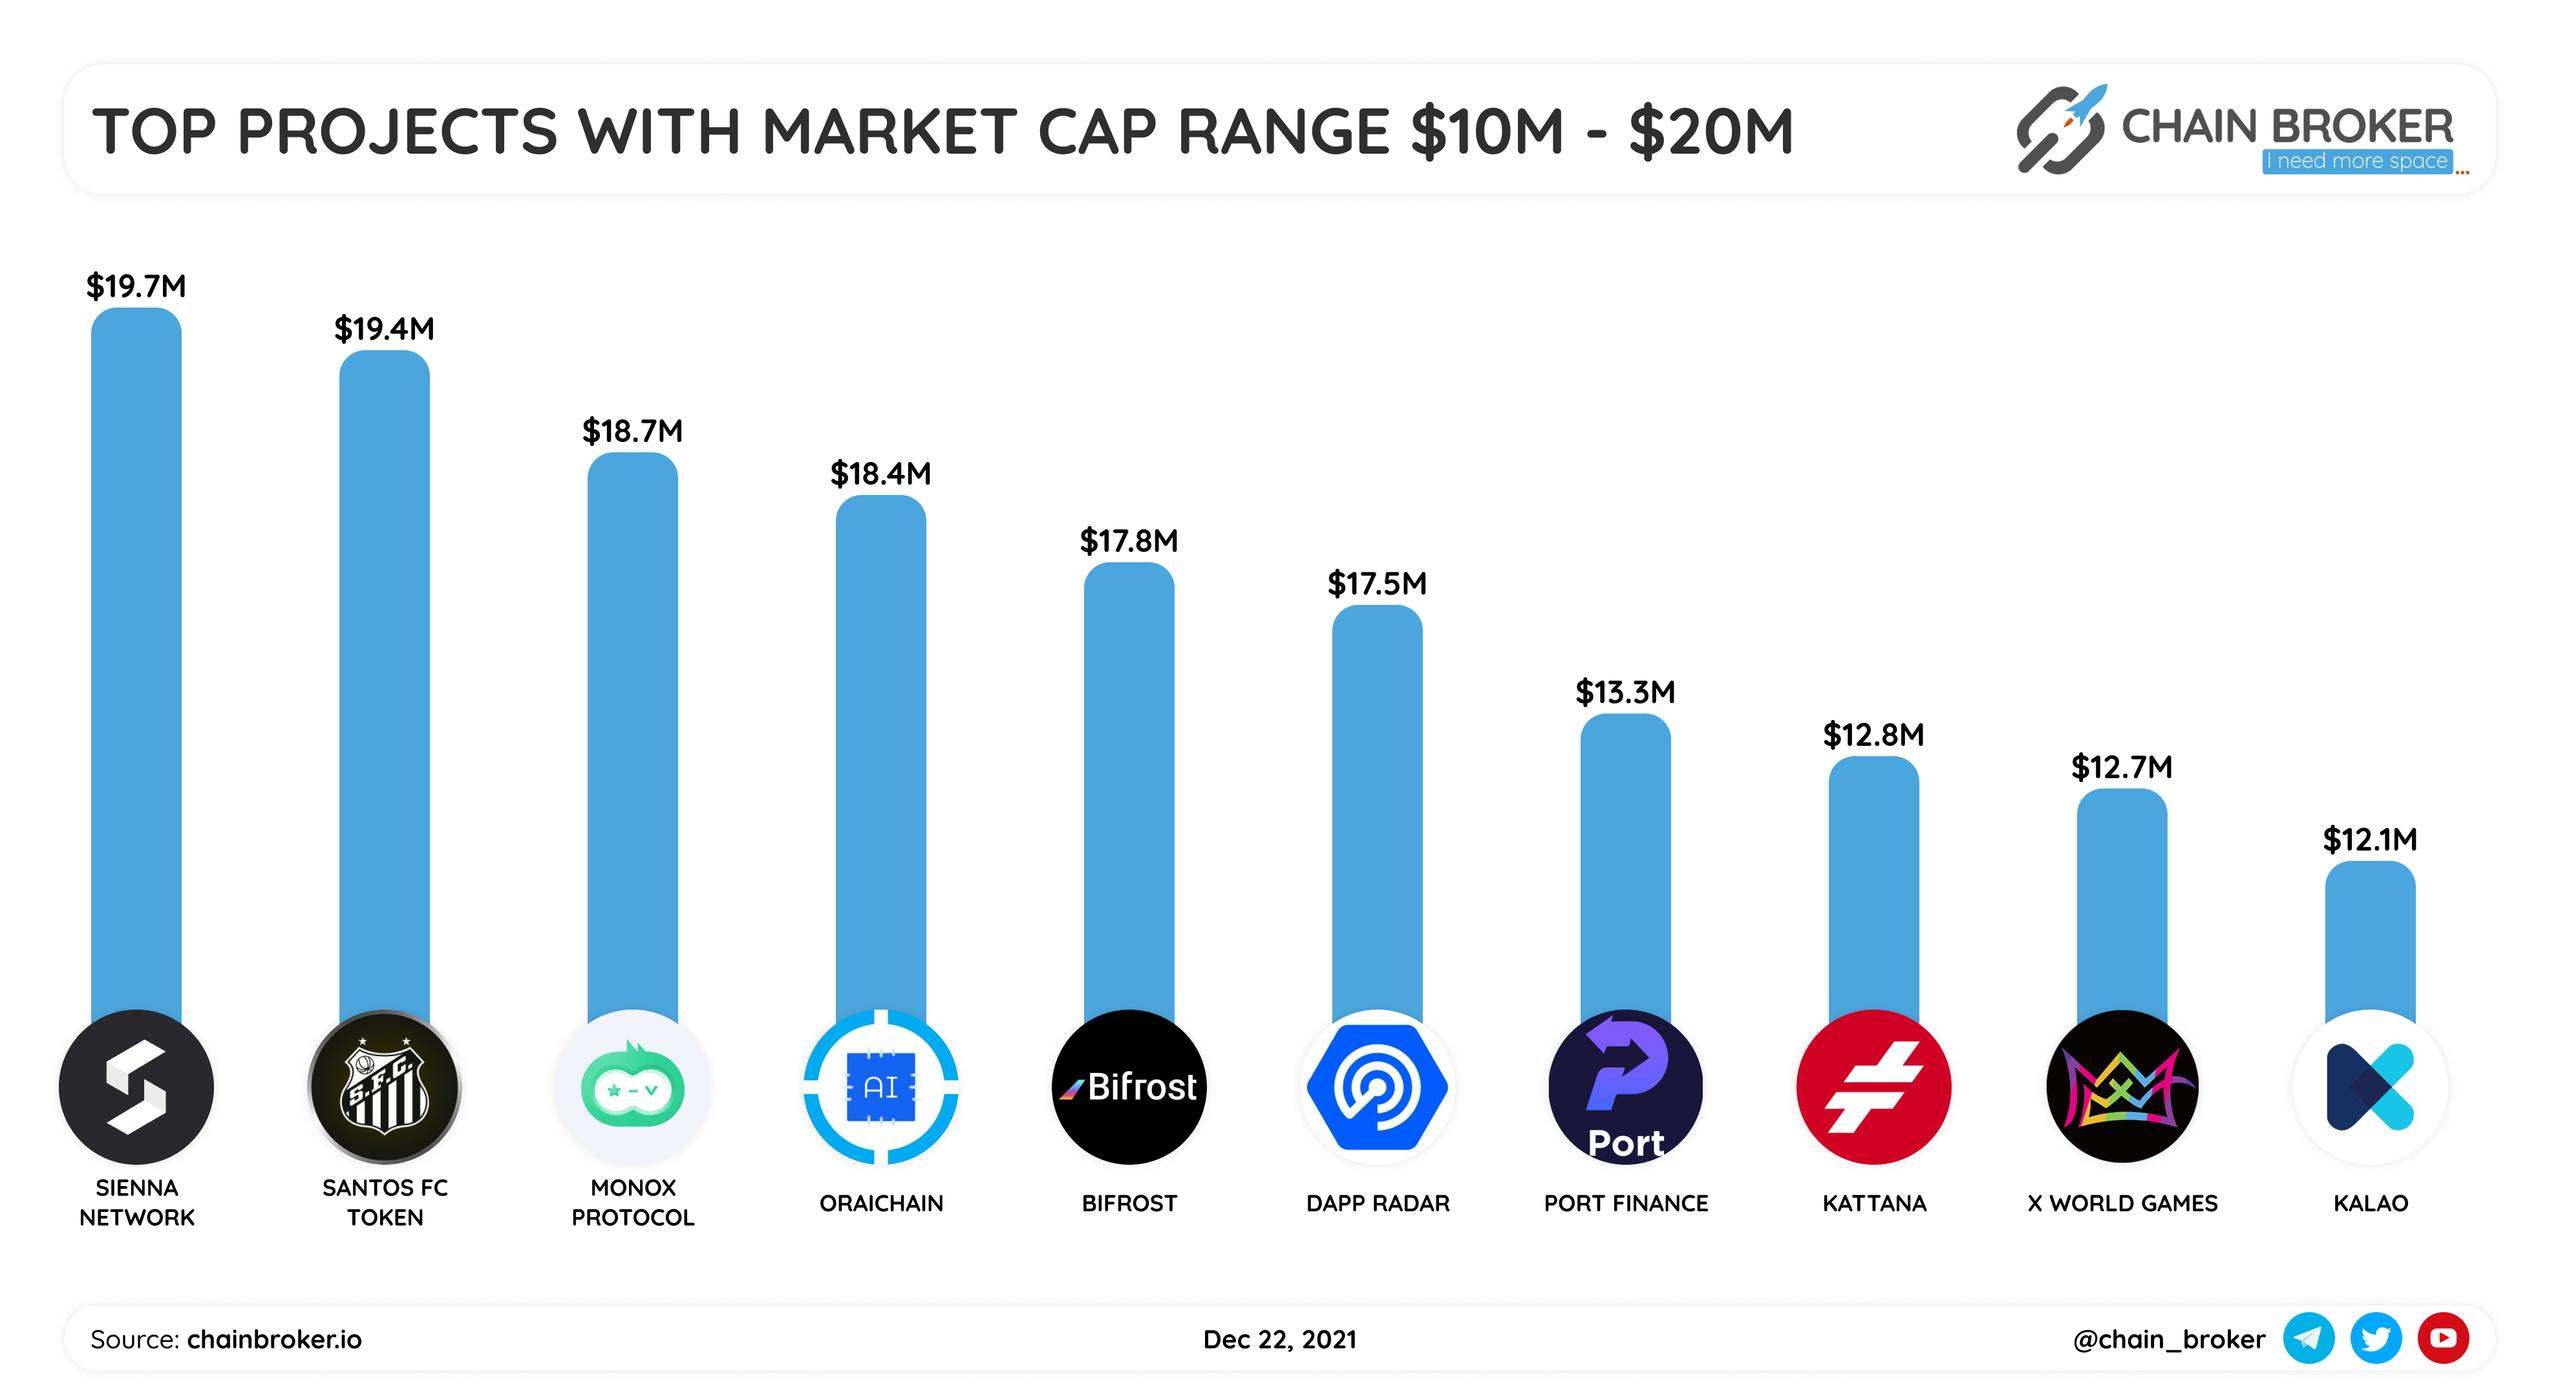 Top projects with market cap range $10M-$20M